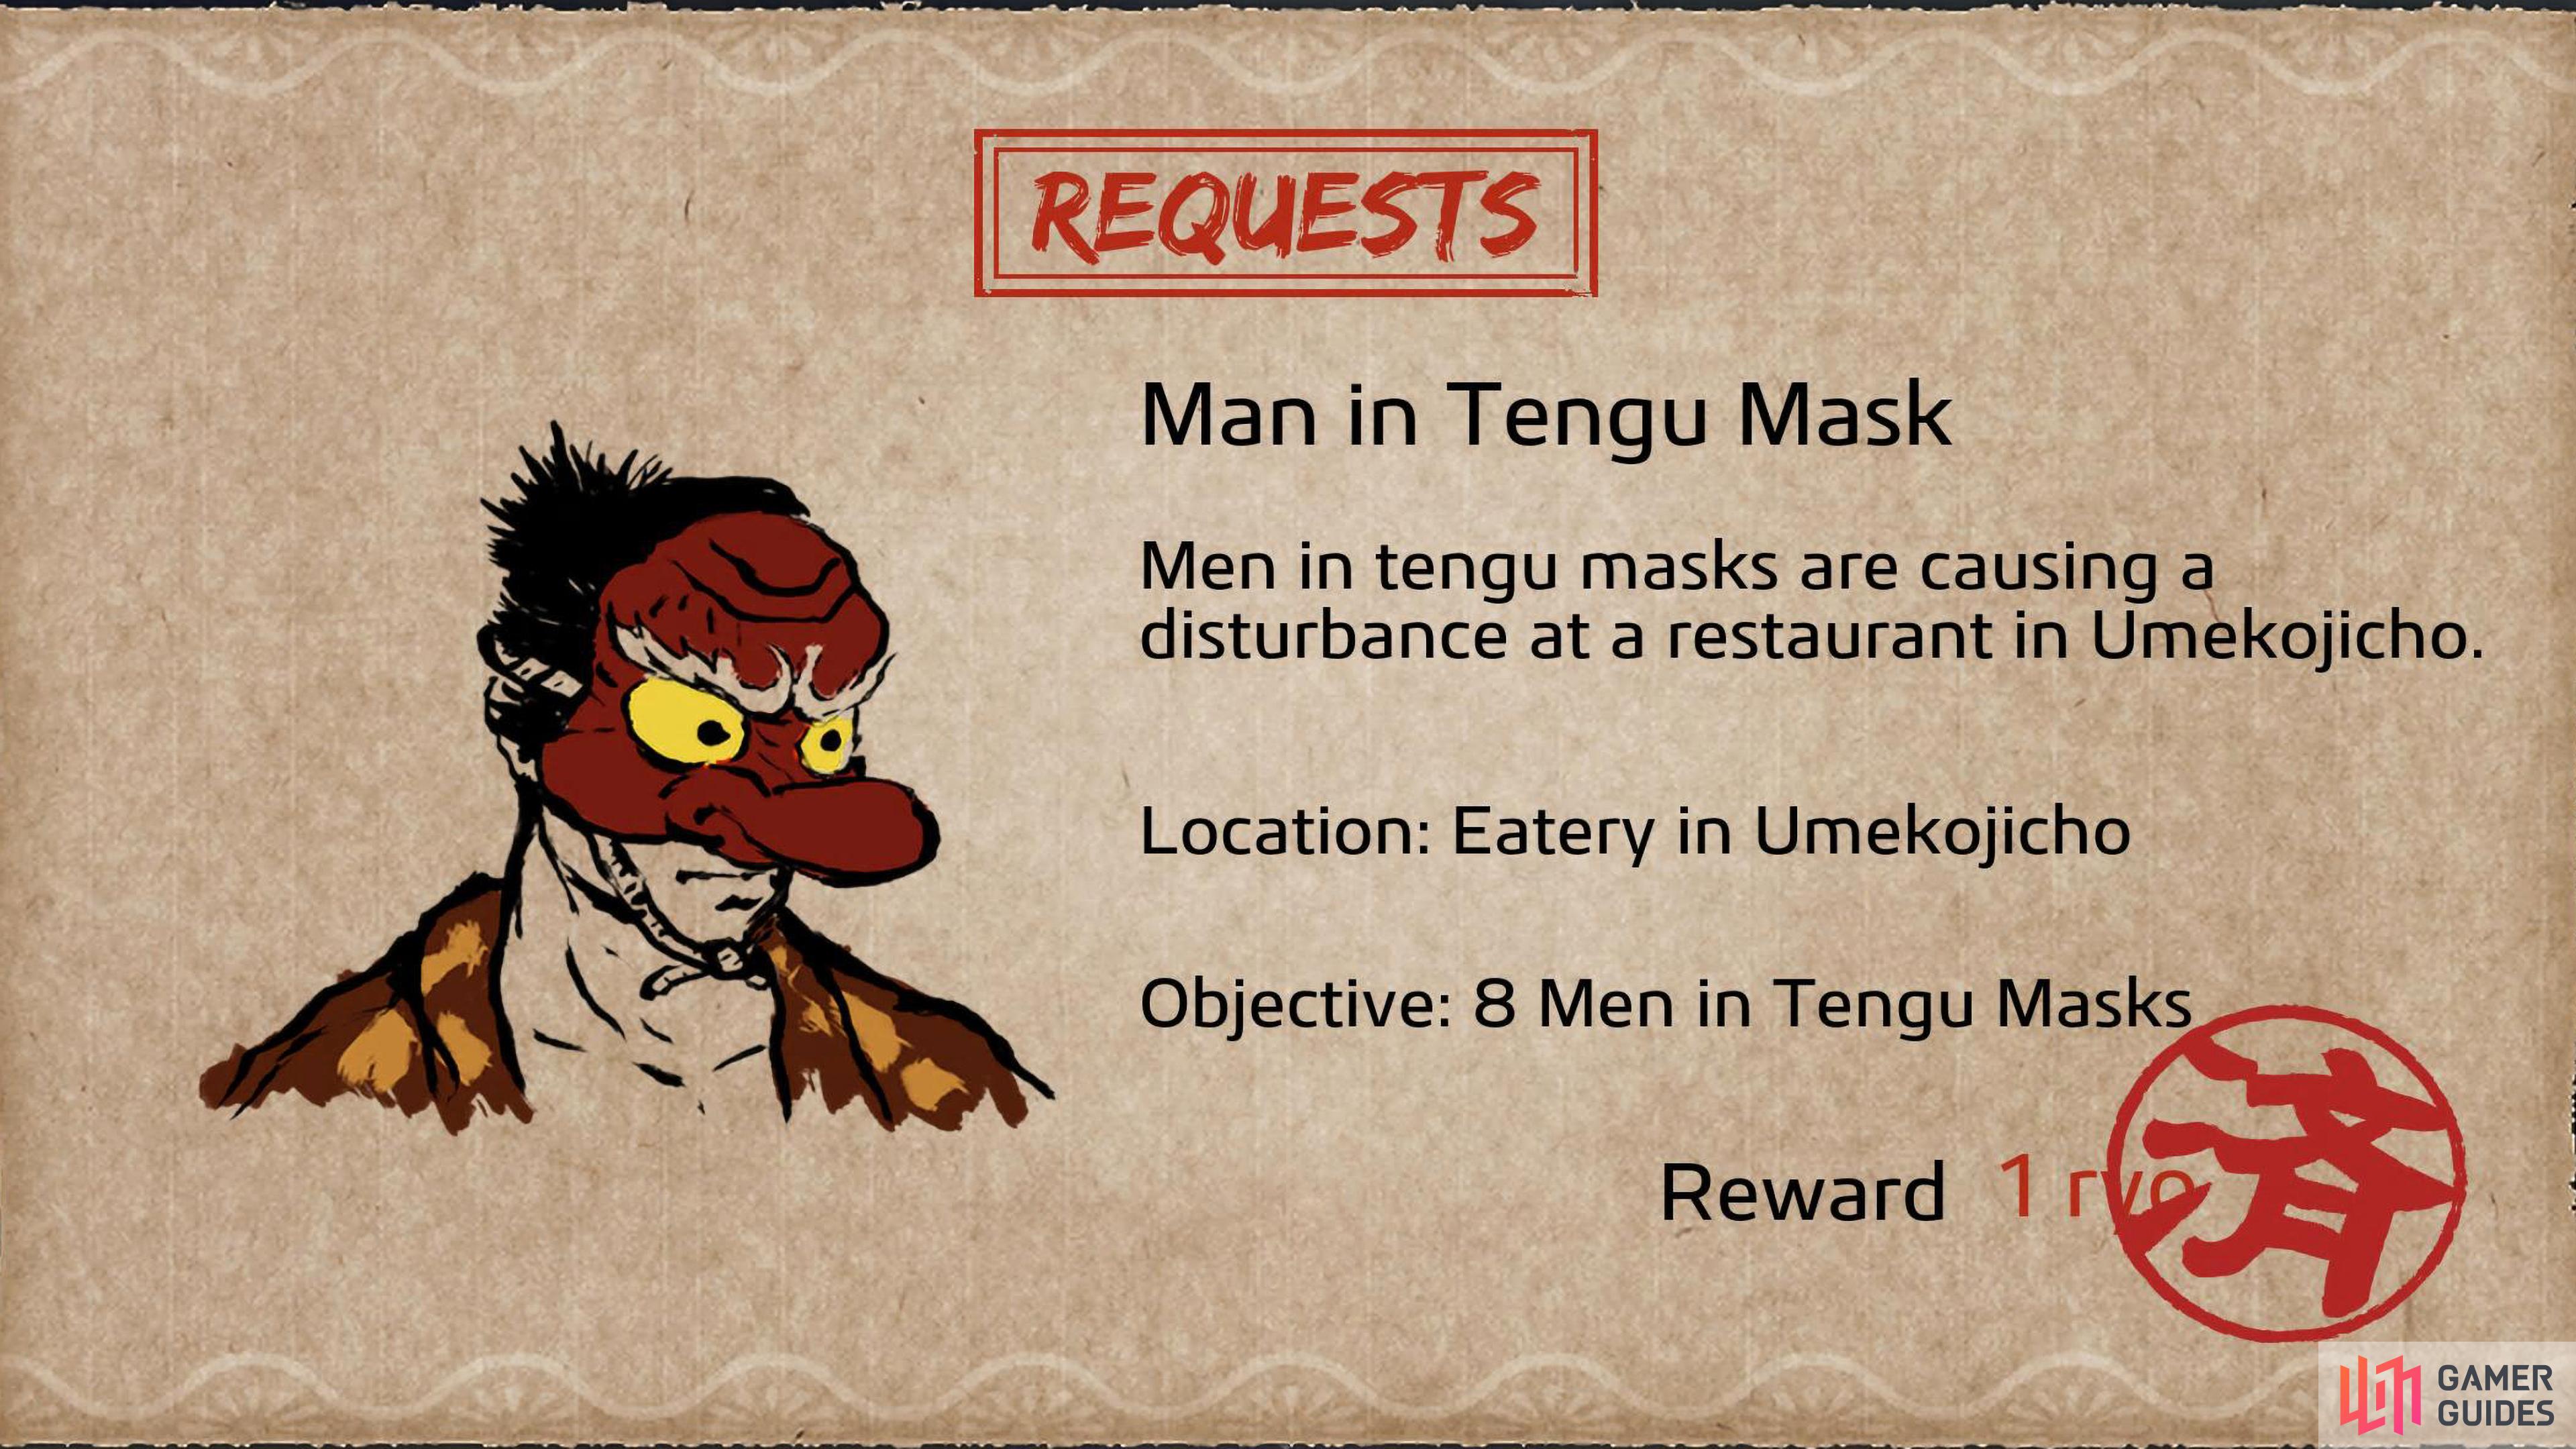 The Man in Tengu Mask bounty is the first request of the Wanted Men.